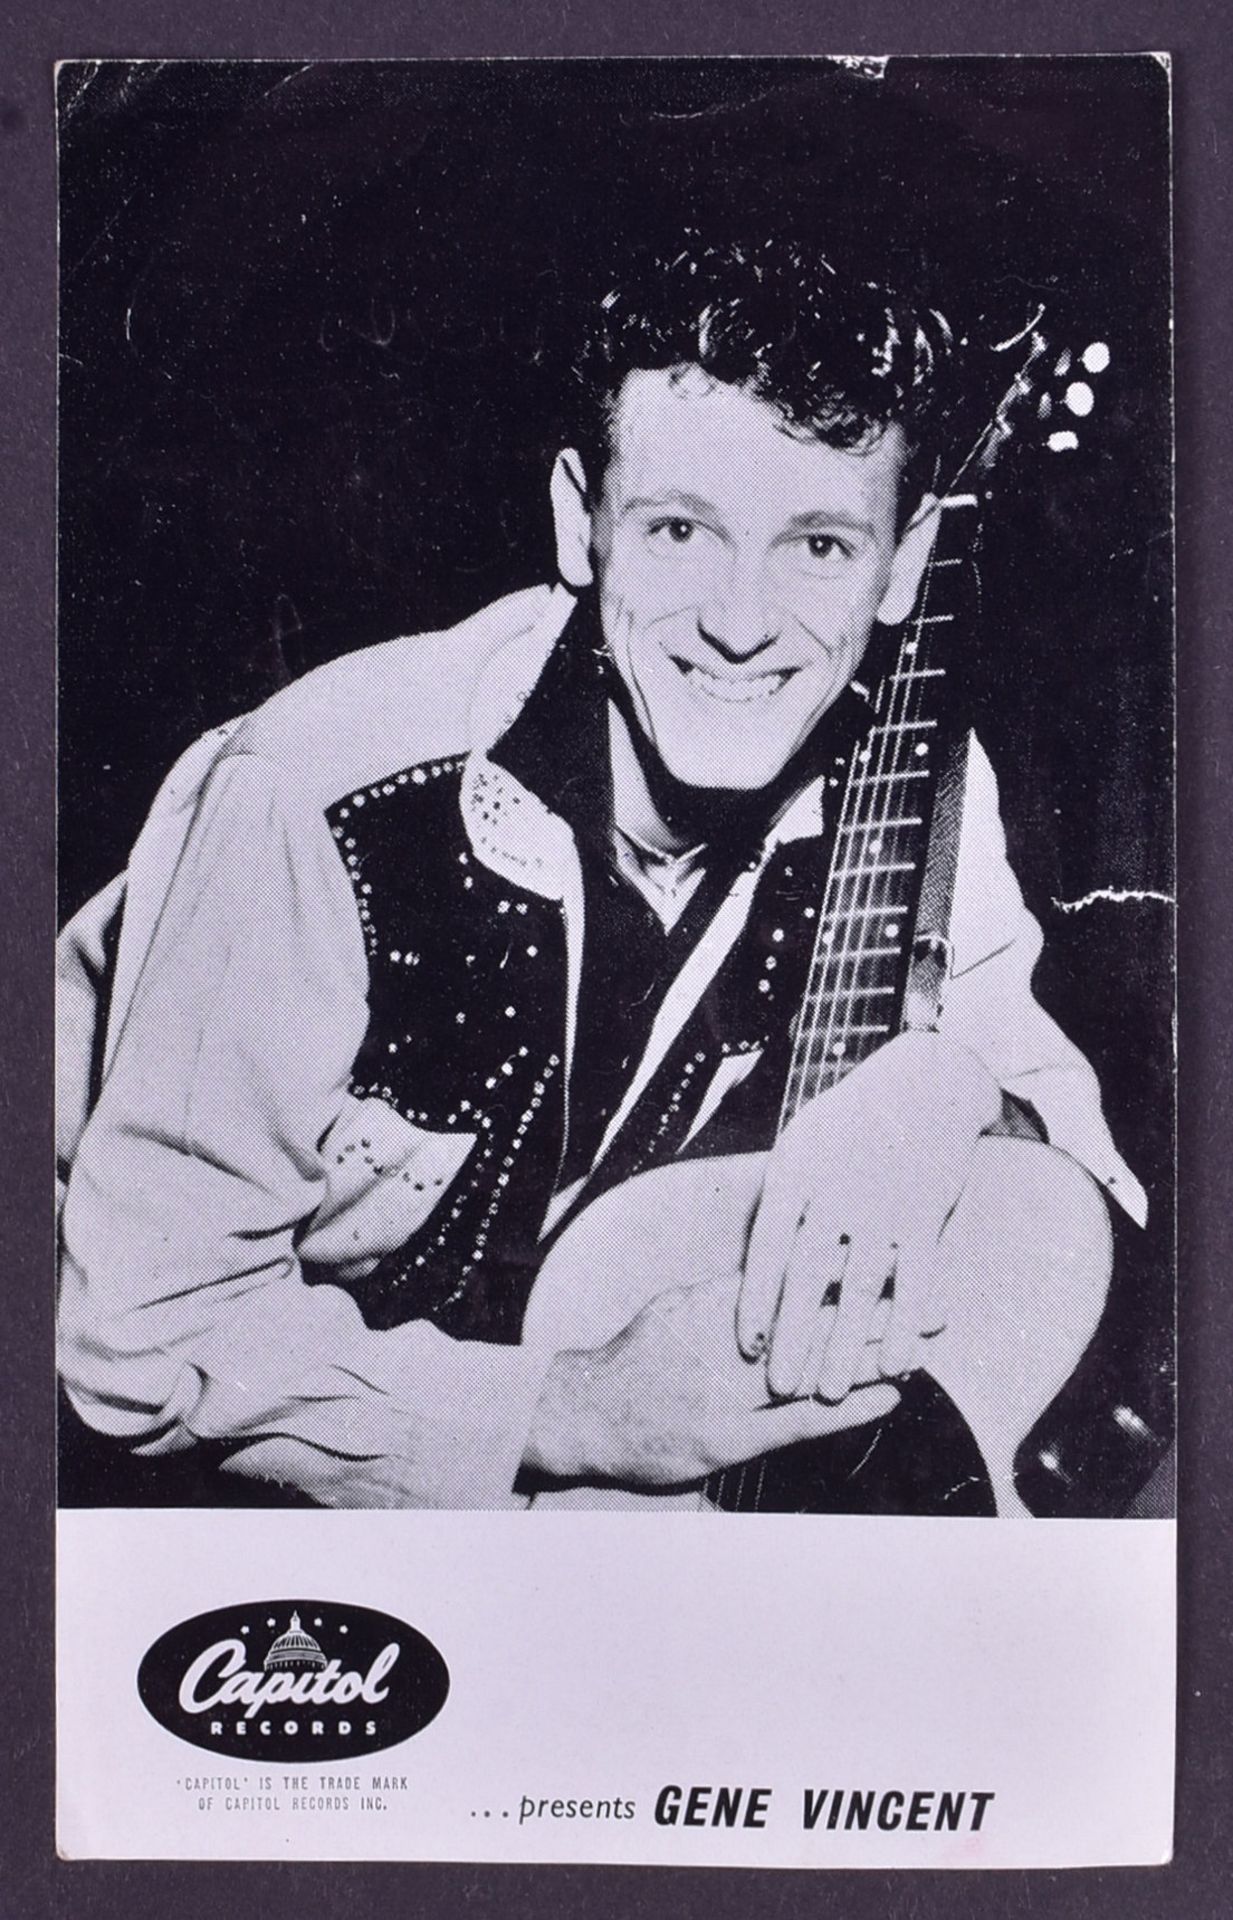 GENE VINCENT - ROCK AND ROLL - EARLY SIGNED PHOTOGRAPH